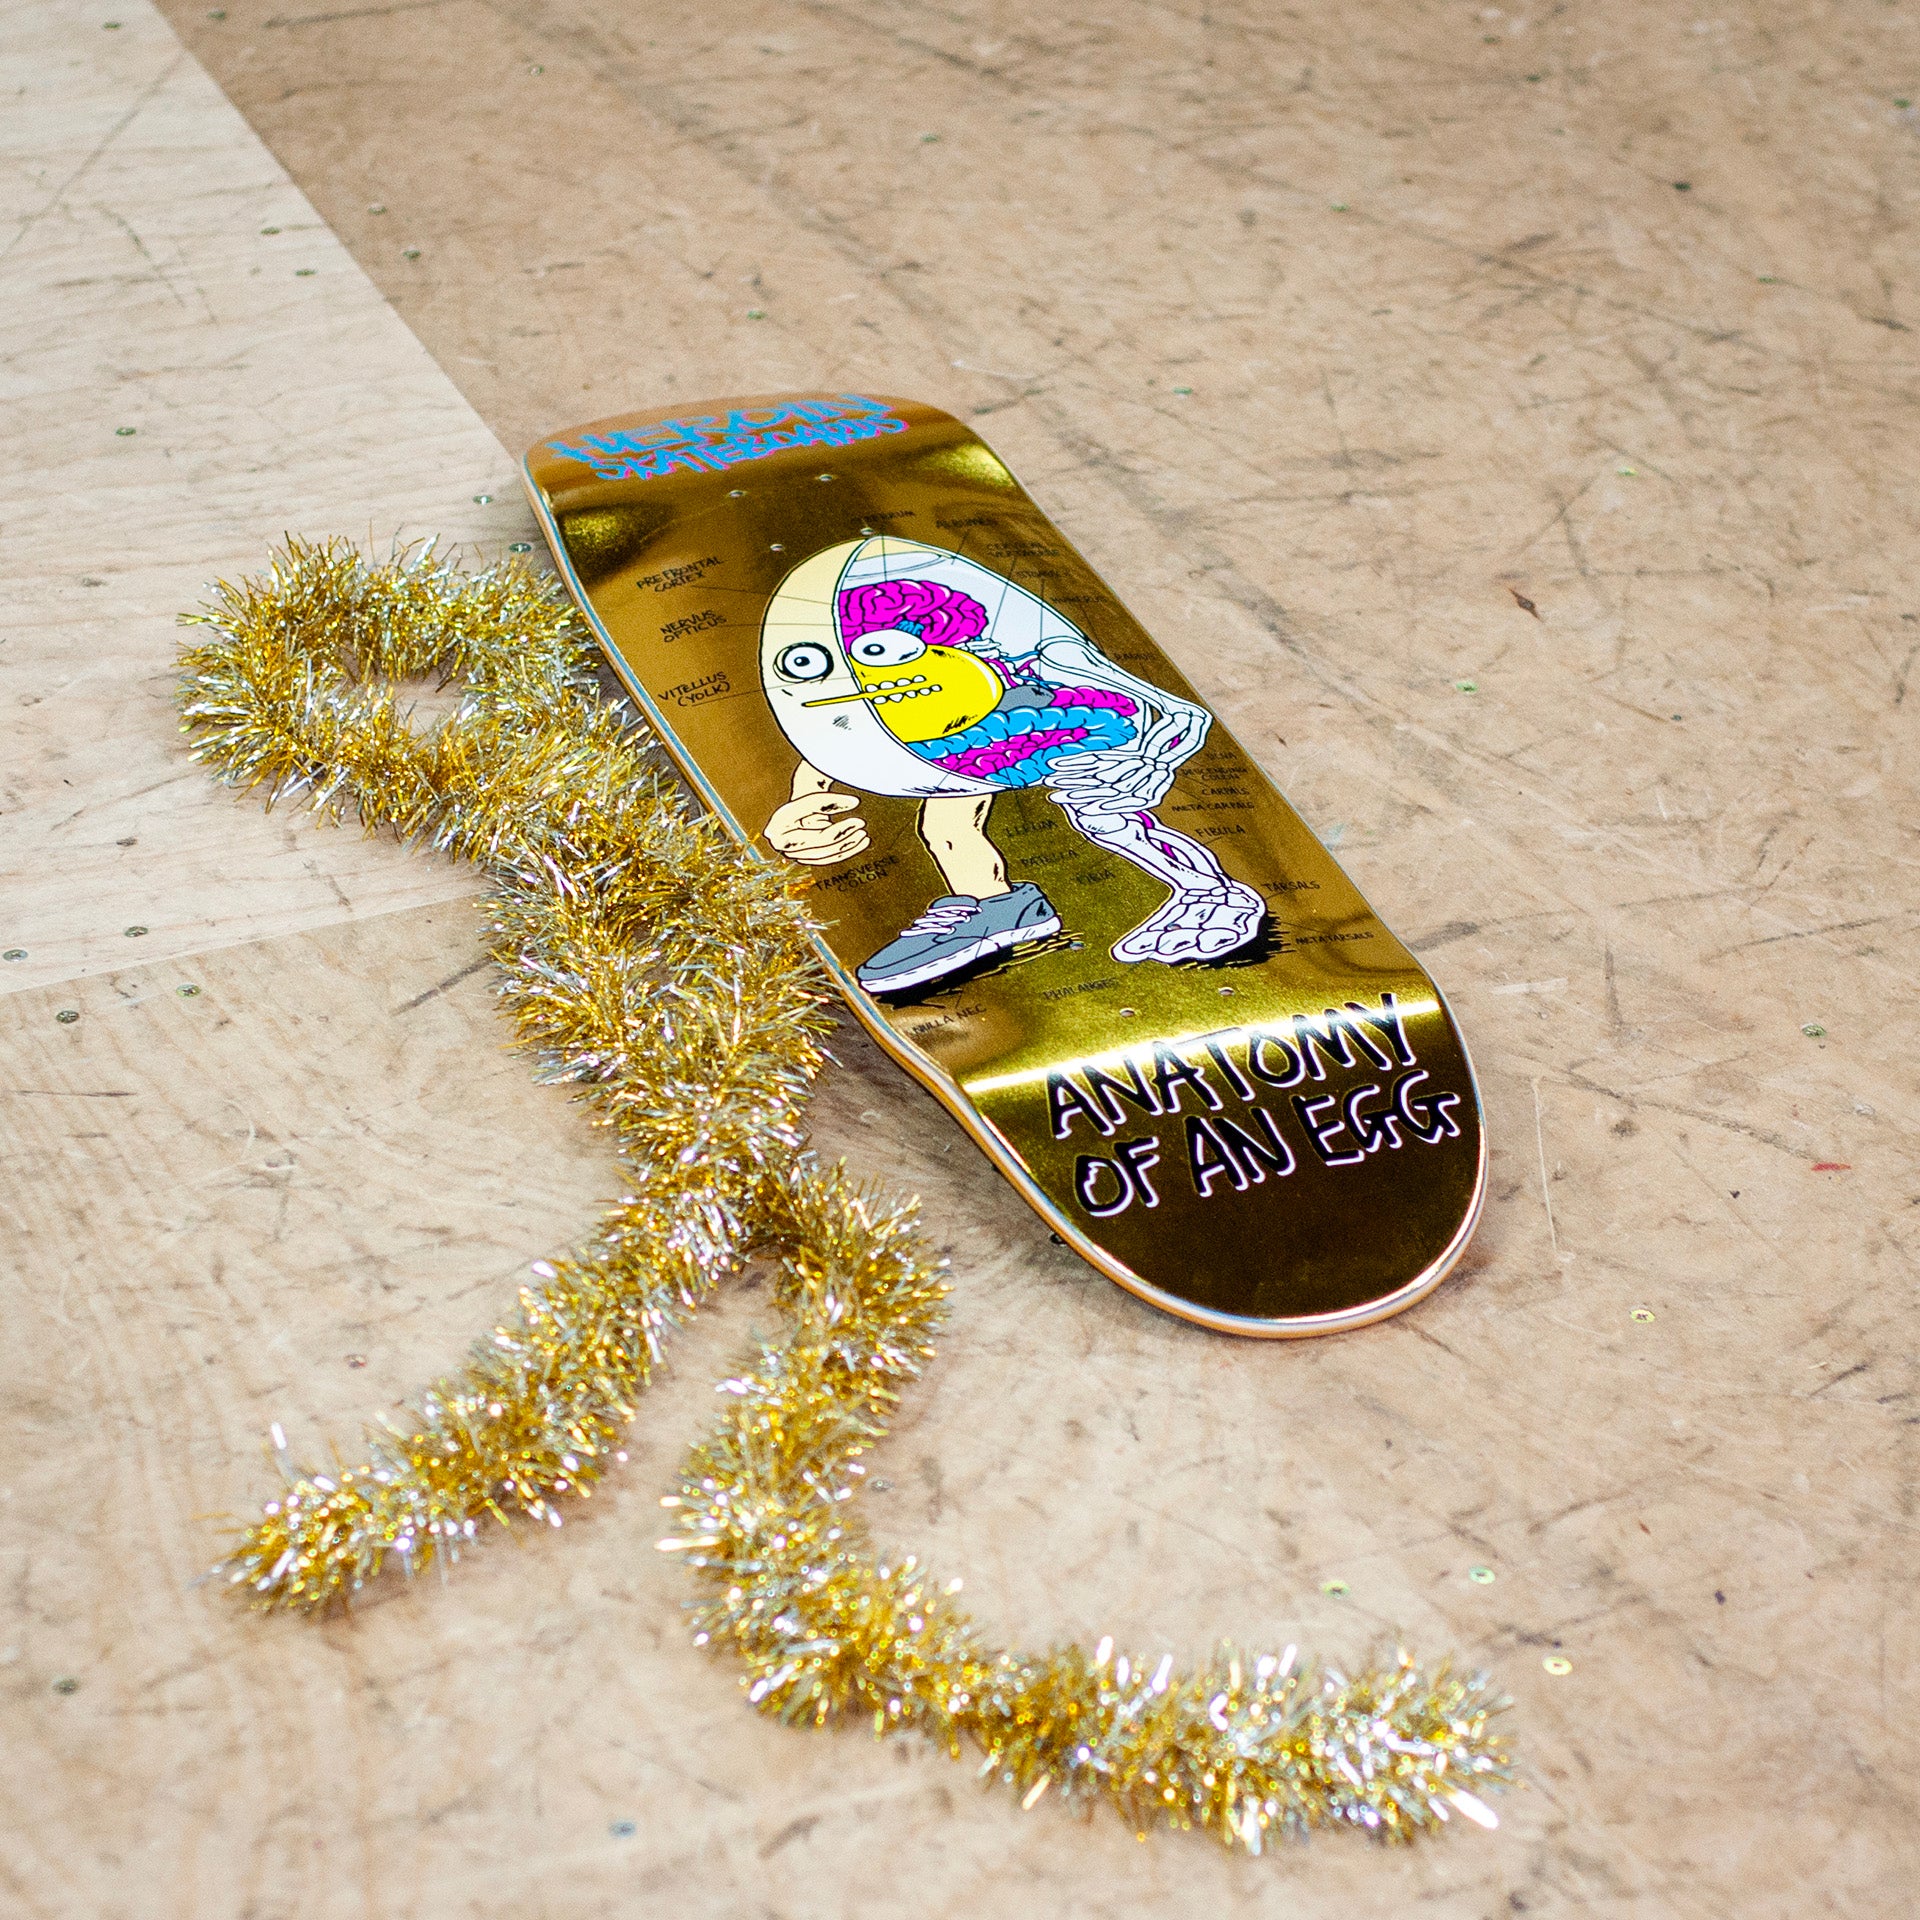 Shop Heroin Skateboards at Prime Delux Store Plymouth